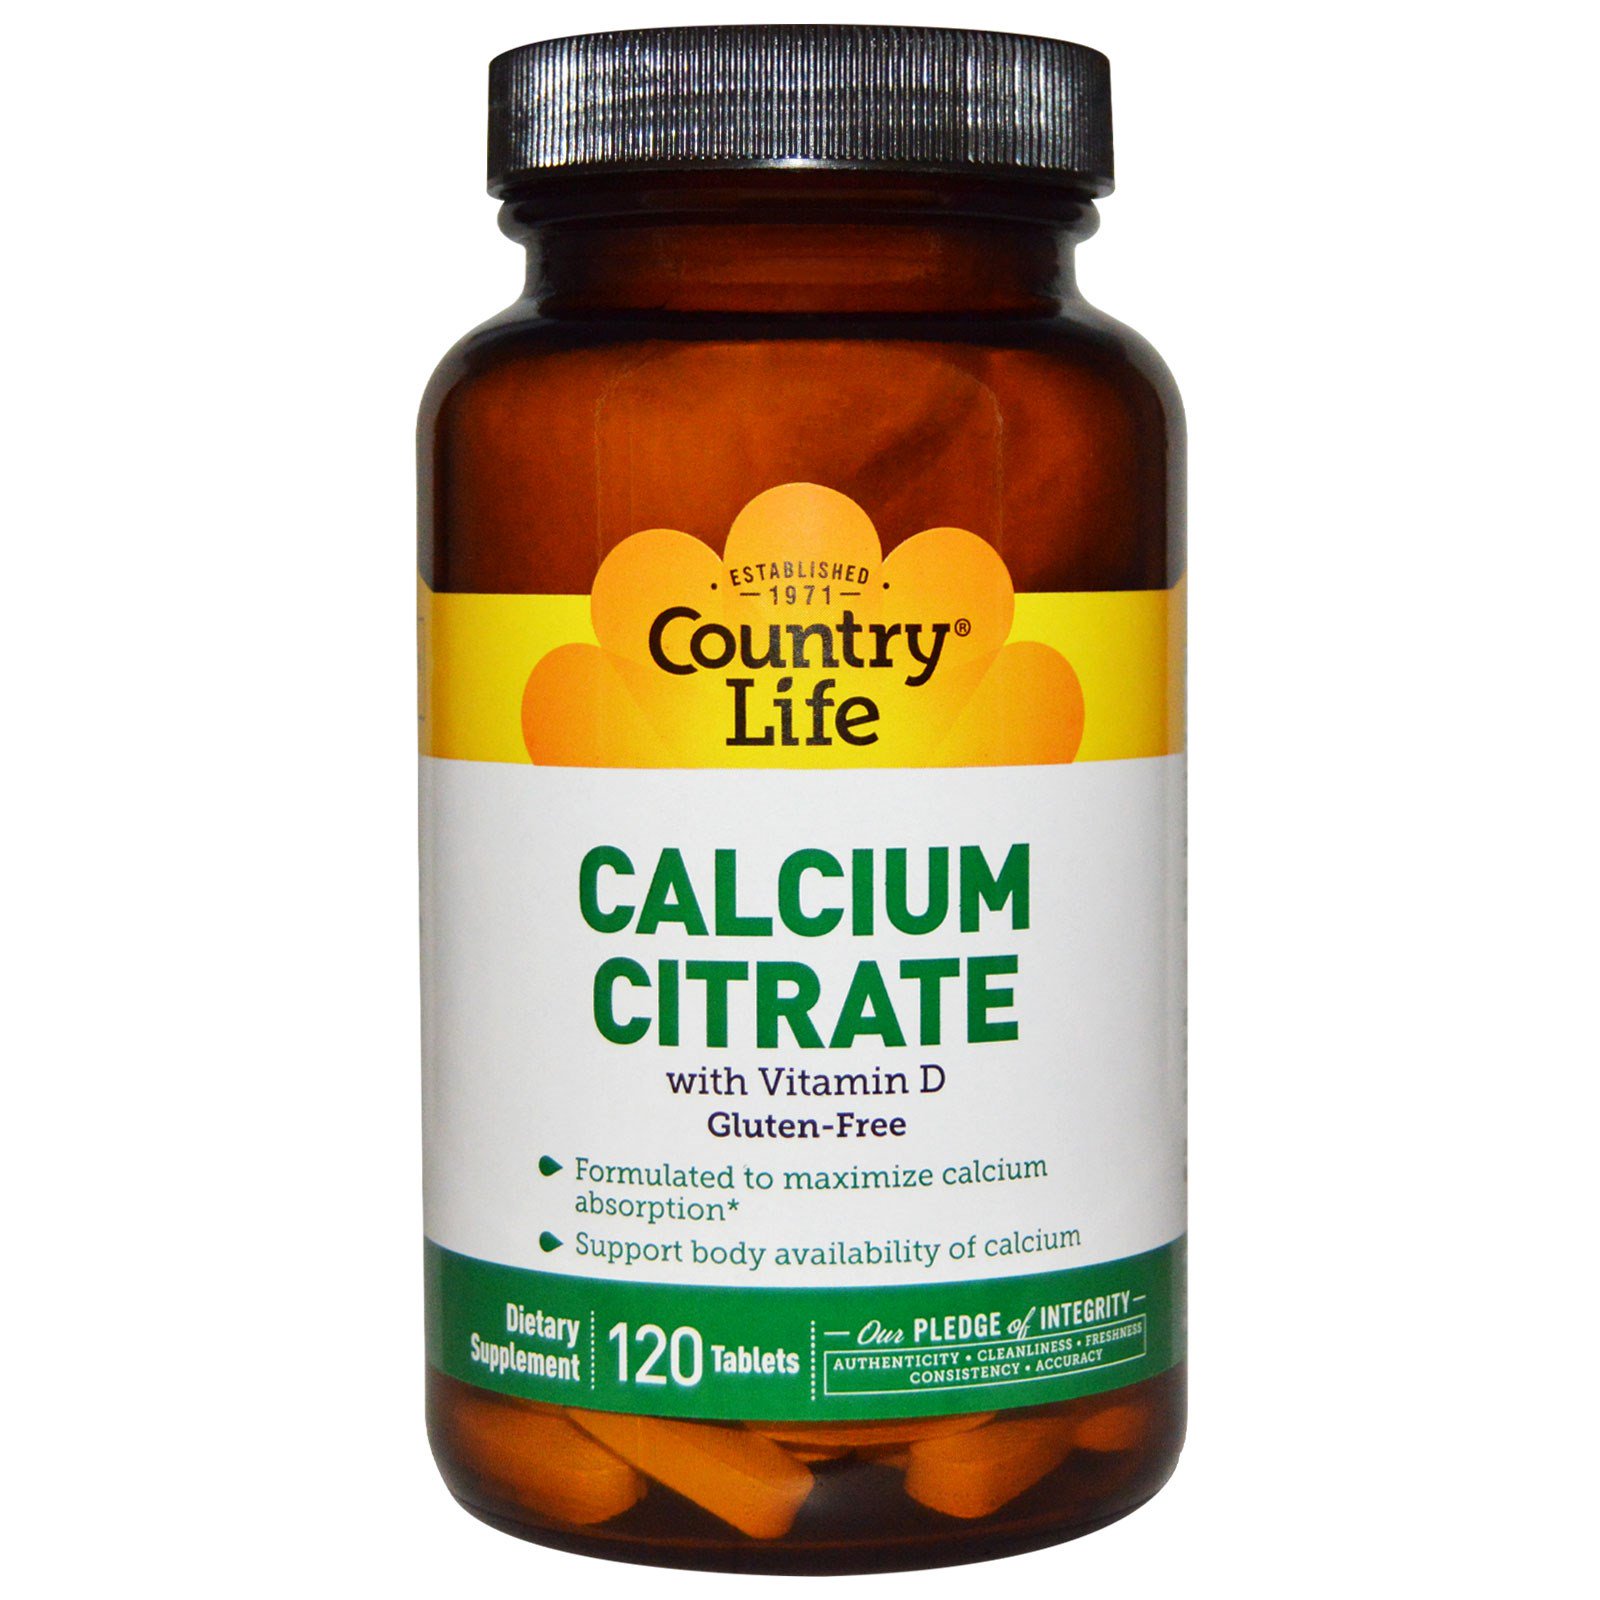 download calcium citrate with vitamin d